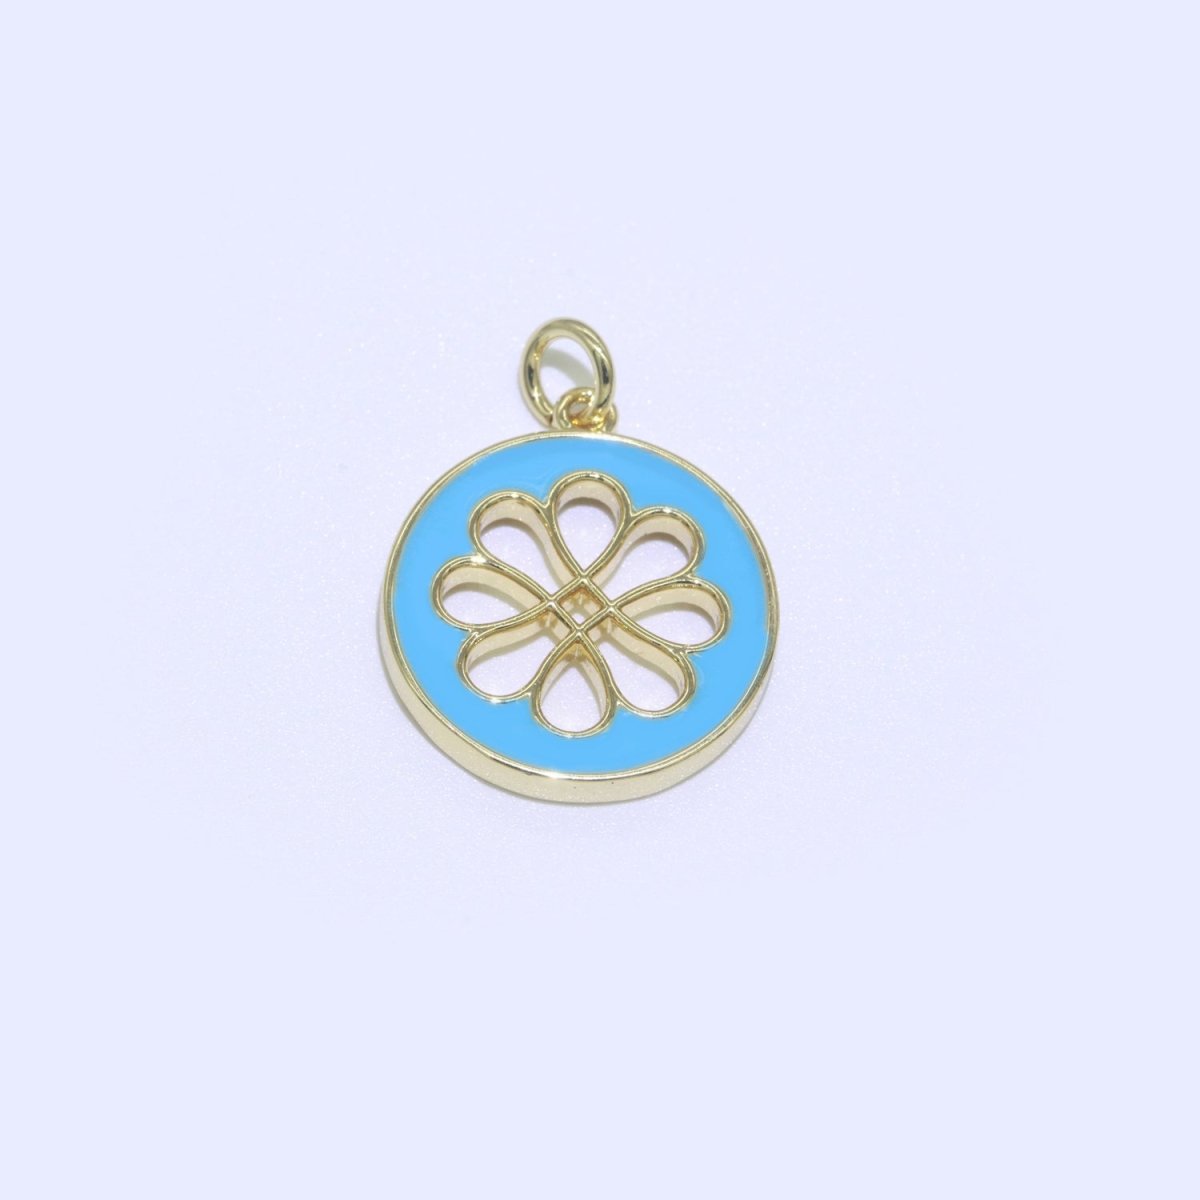 Enamel Daisy Charm 24k Gold Filled Hollow Round Charm Gold Floral Charms, Dainty Flower Pink, Teal, White, Yellow Green Pendant M-393 - M-402 - DLUXCA